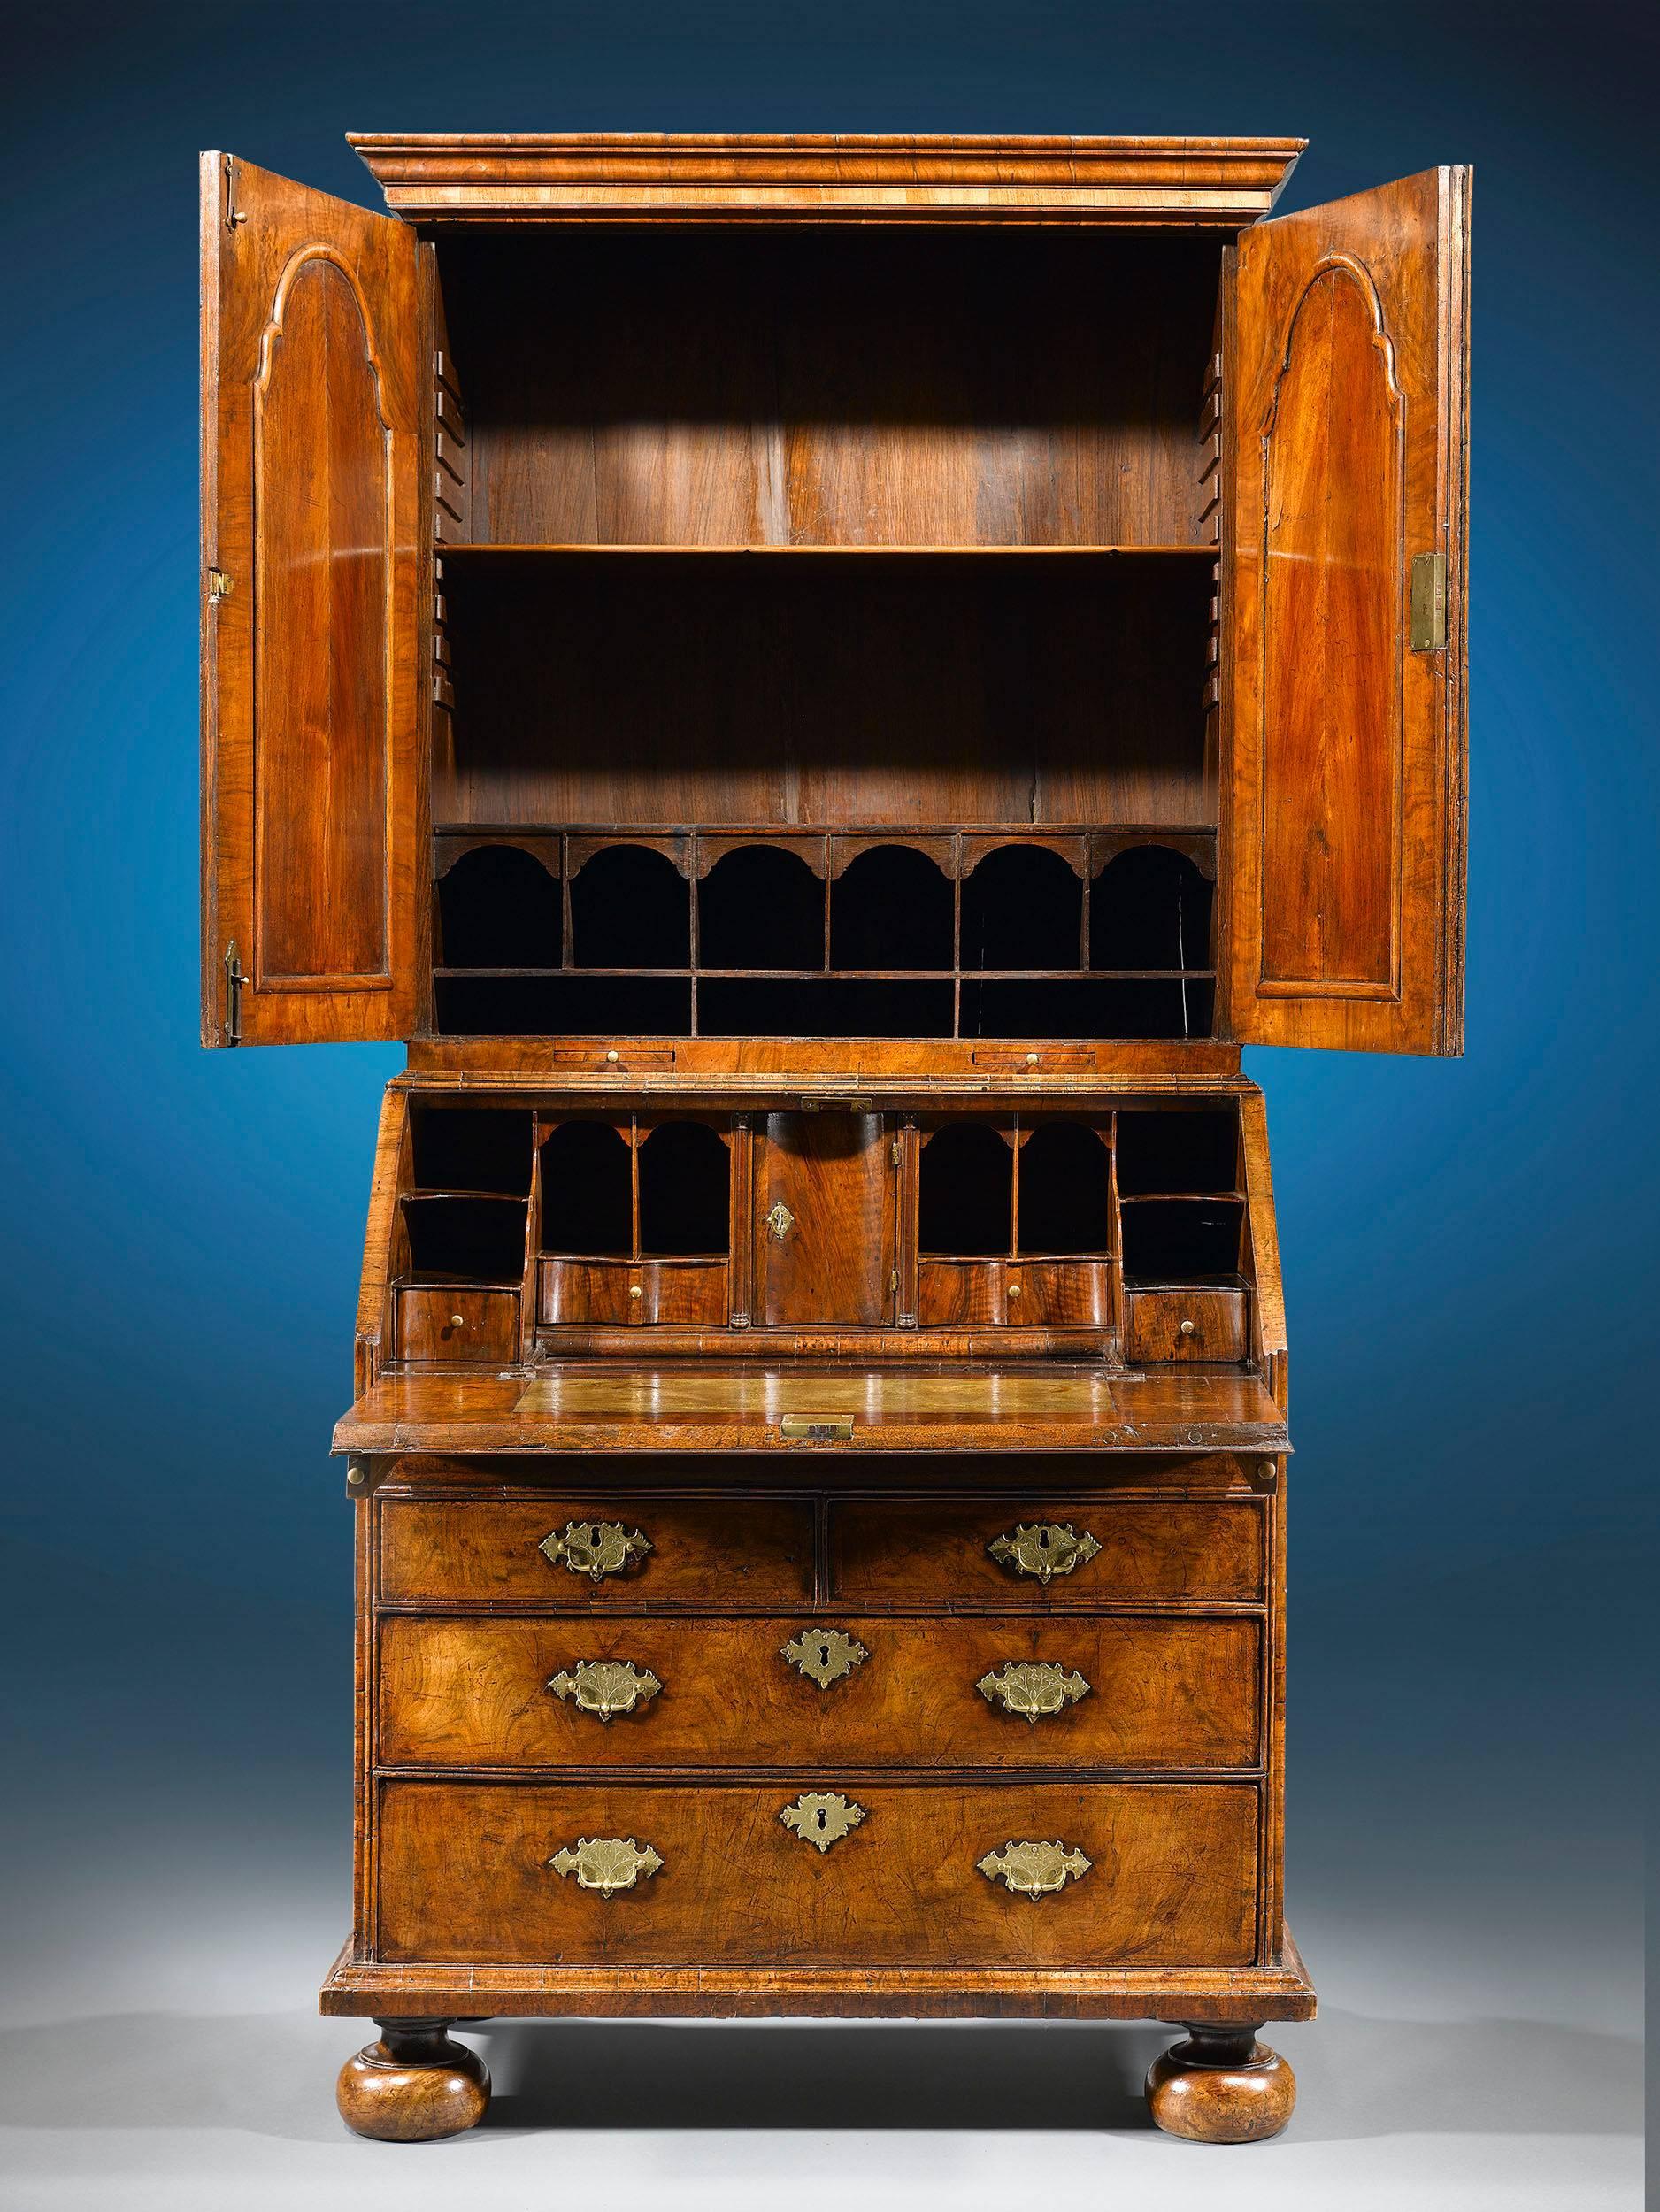 Queen Anne period furnishings such as this walnut secretary are incredibly rare and important examples of English cabinetmaking. This secretary is of the most outstanding caliber, boasting desirable double bonnet, mirrored cabinet doors and later